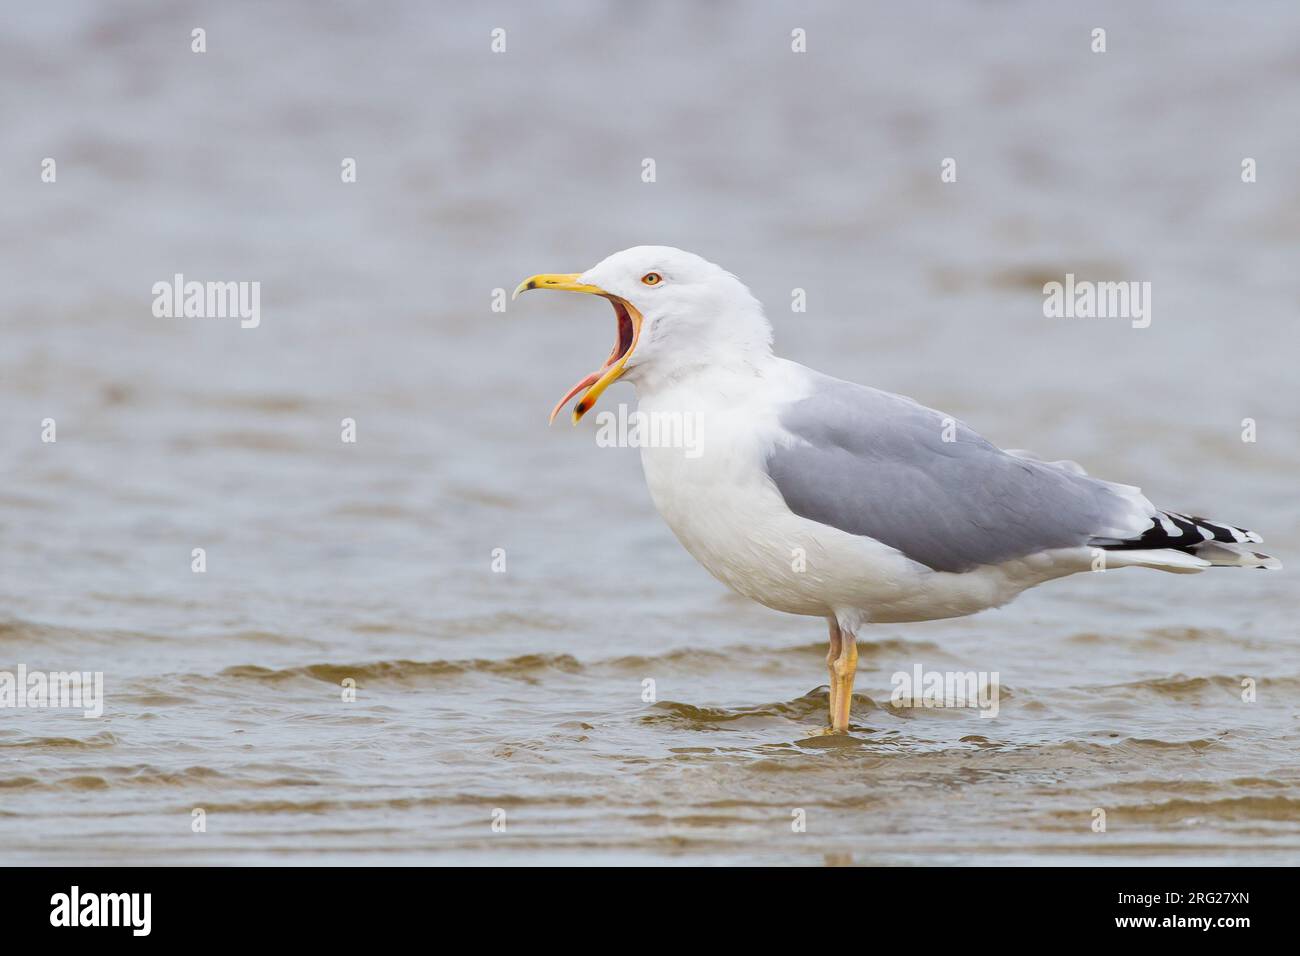 Yellow-legged Gull, Larus michahellis, adult winter standing in water seen from side Stock Photo